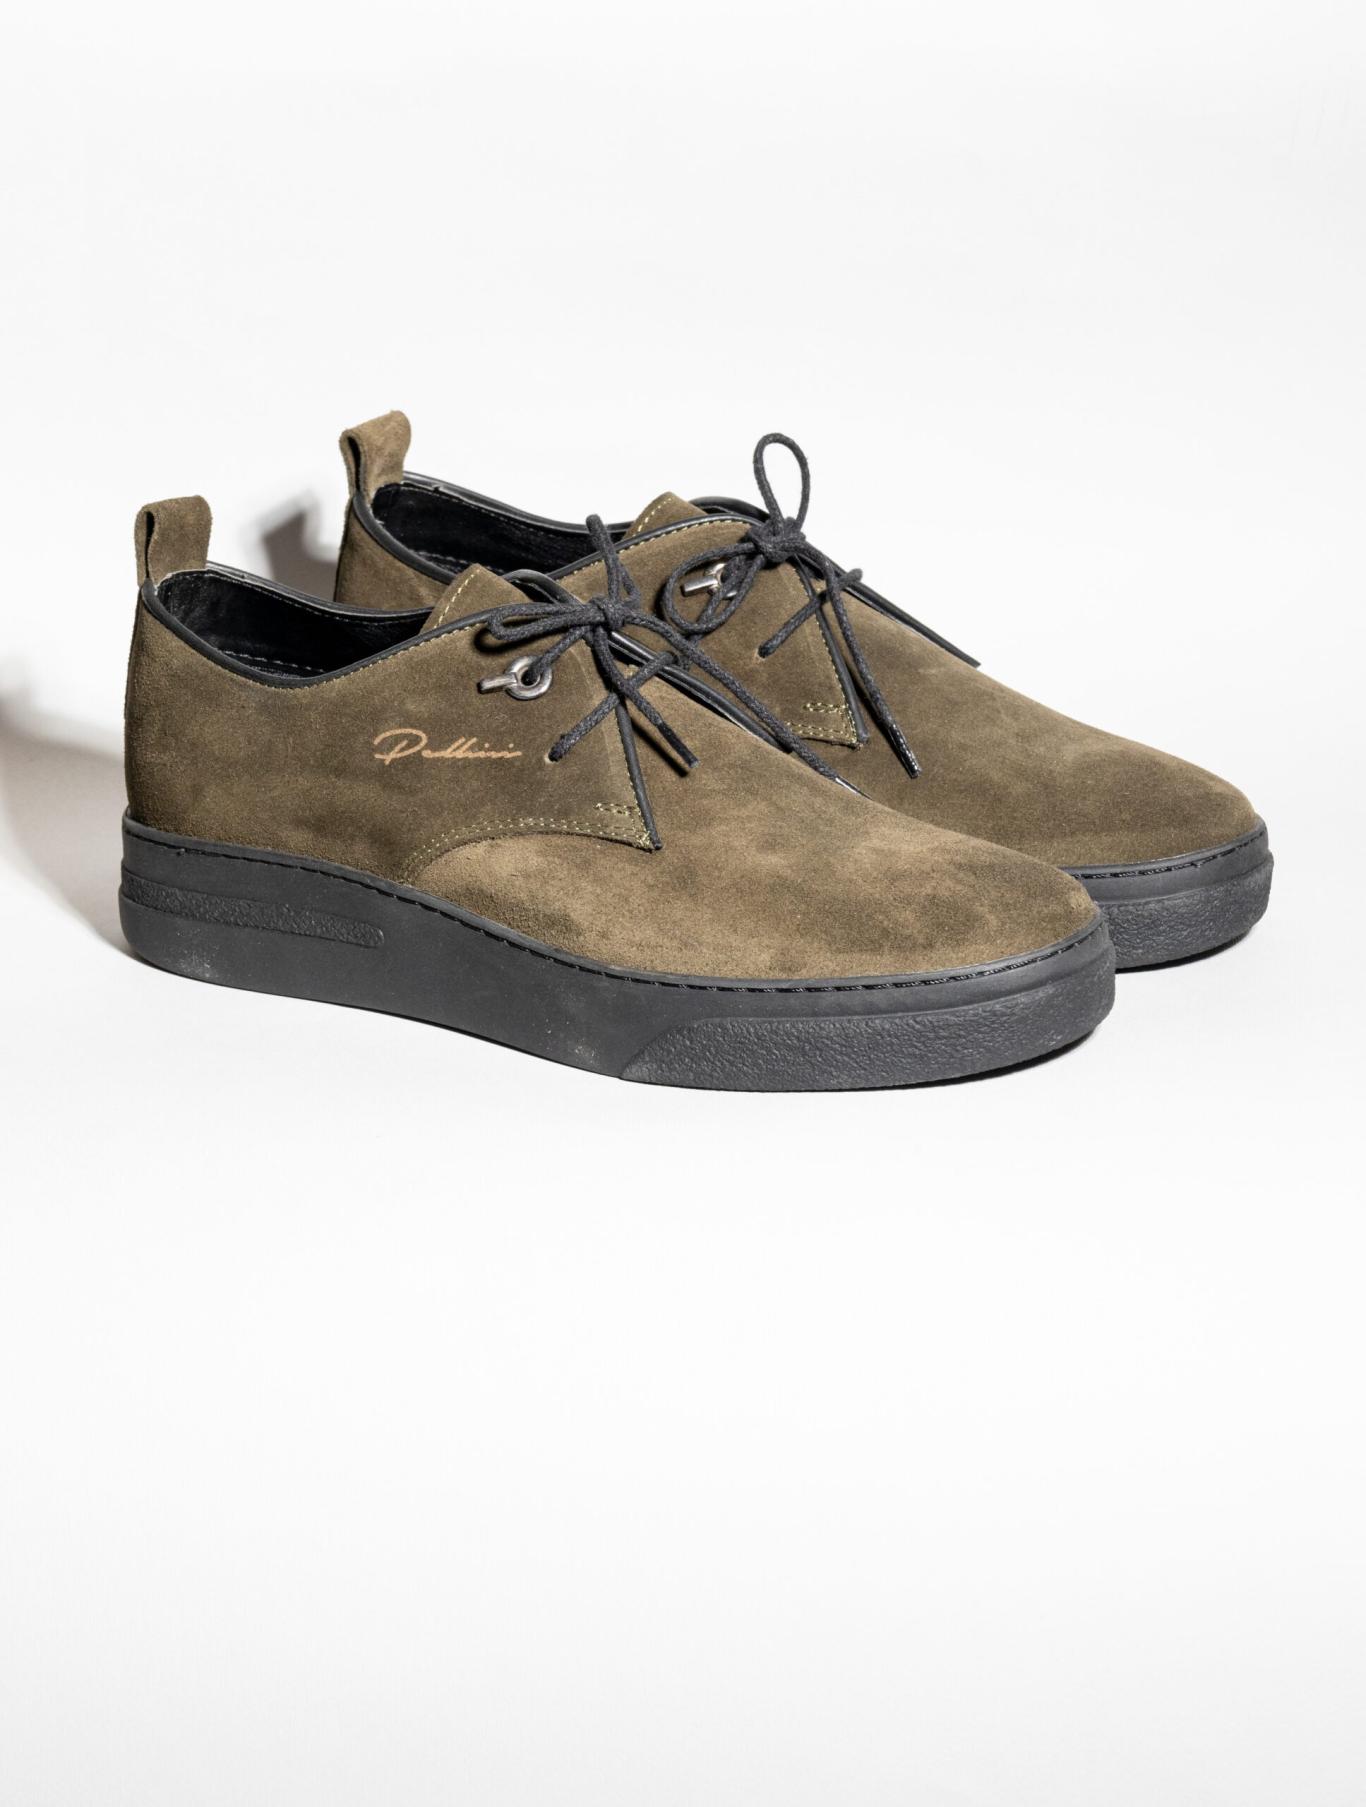 HIGH TOP SUEDE SHOES - Pellini